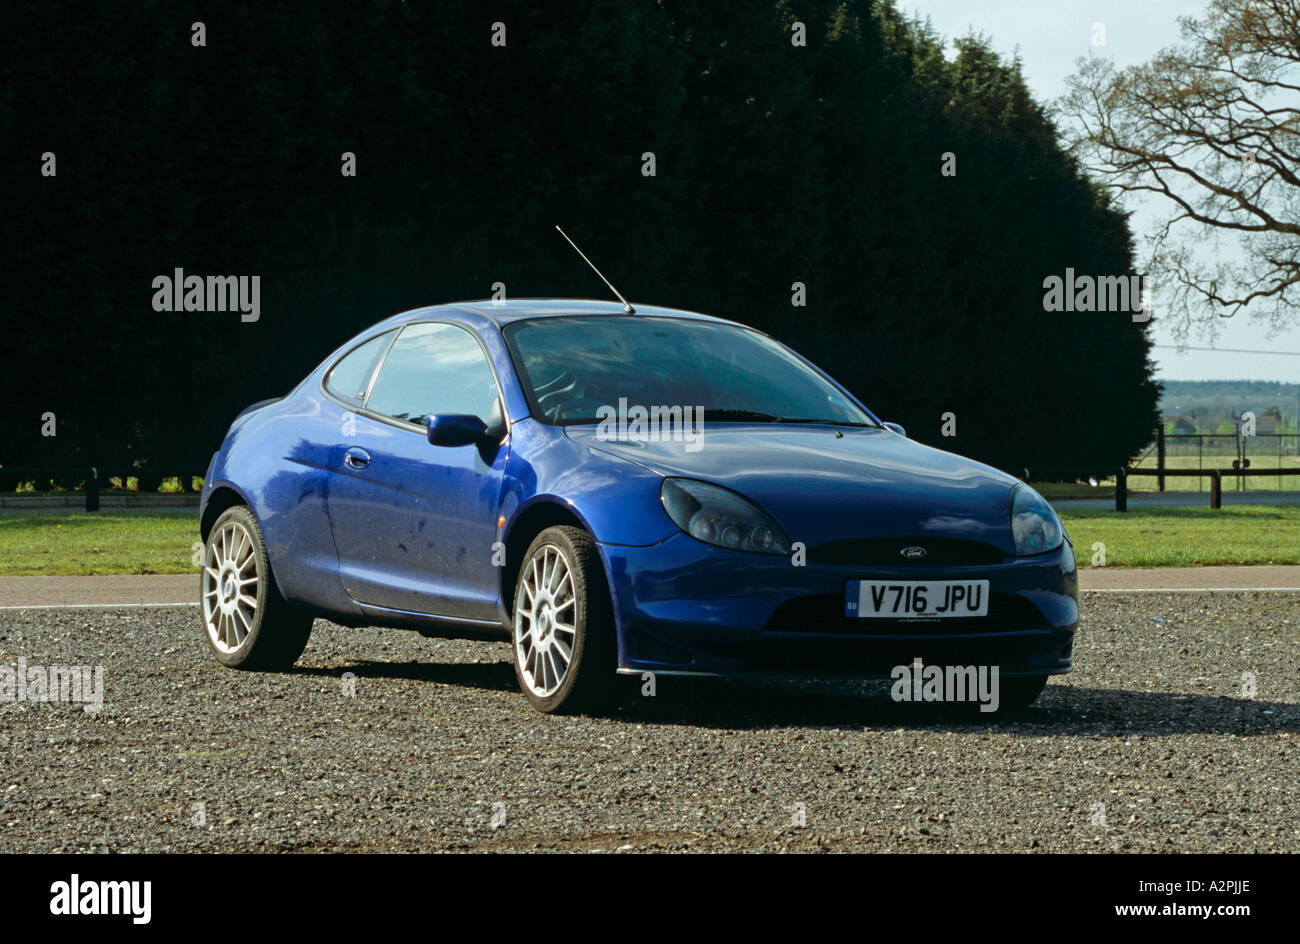 Ford Racing Puma High Resolution Stock Photography and Images - Alamy